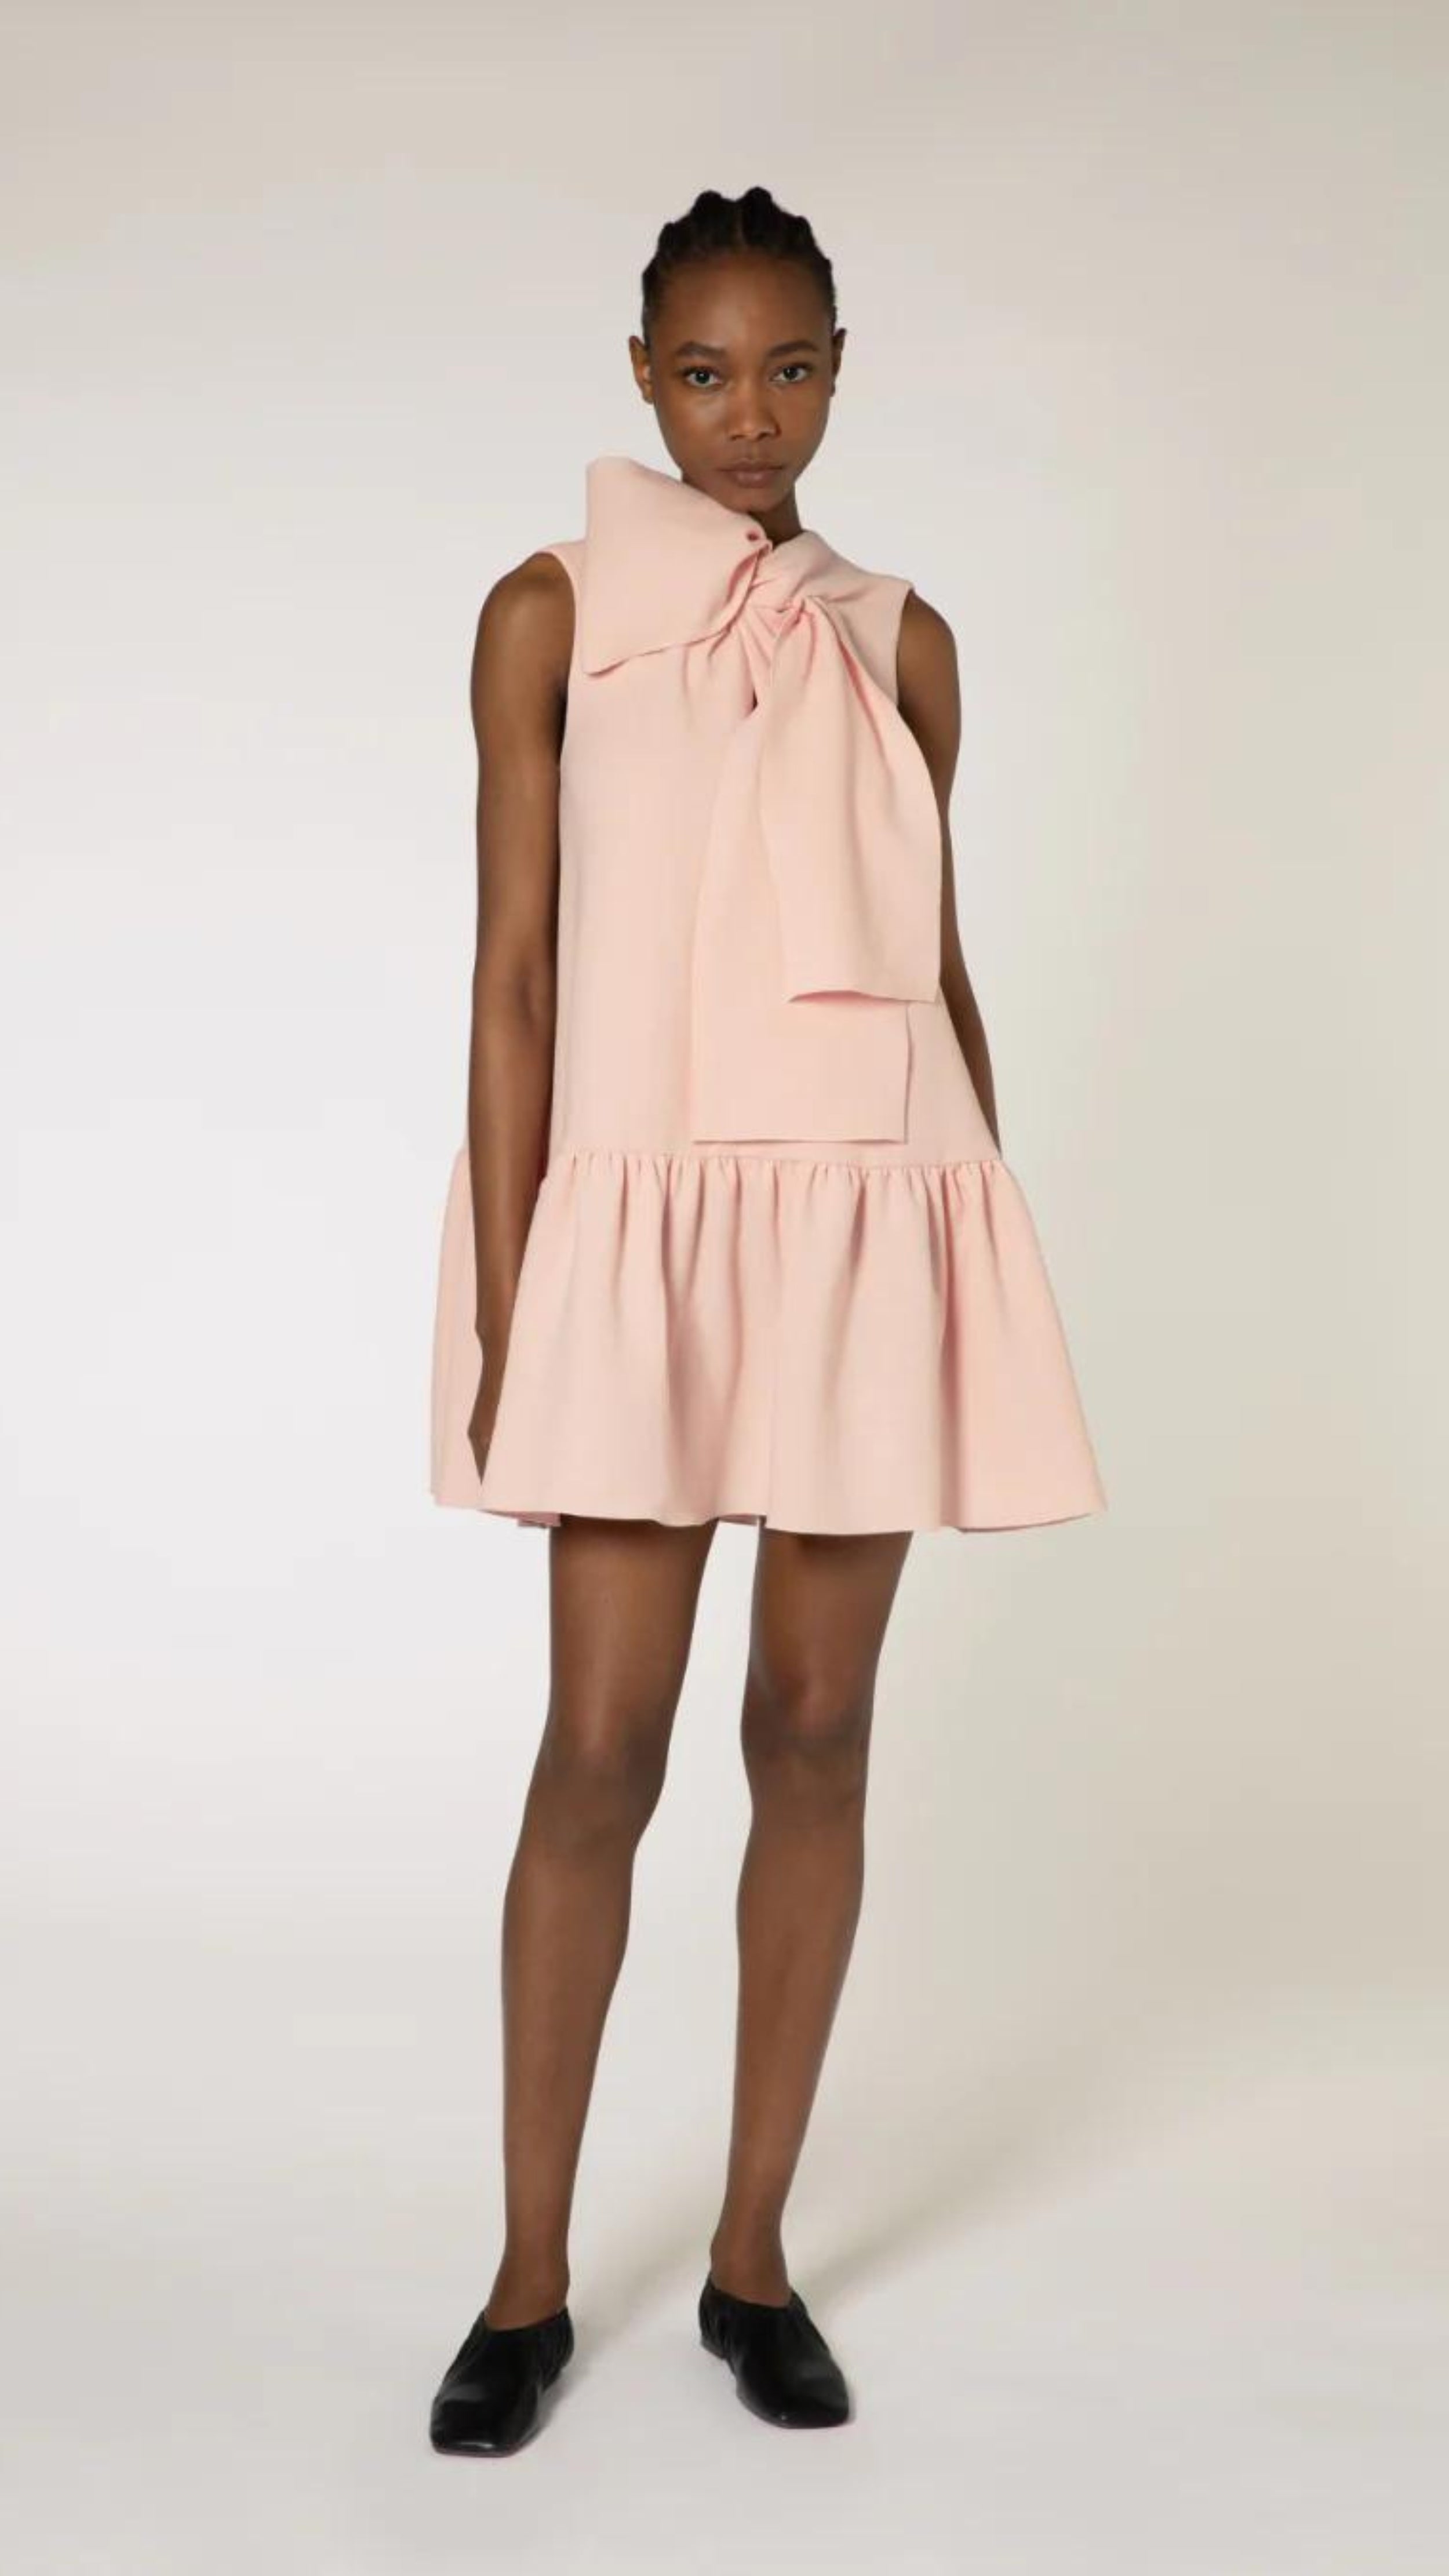 Roksanda Rosalina Dress. Soft pink with fun oversize twisted bow at neckline. Mini dress length with a dropped waist and pleated skirt panel. Shown on model facing front.